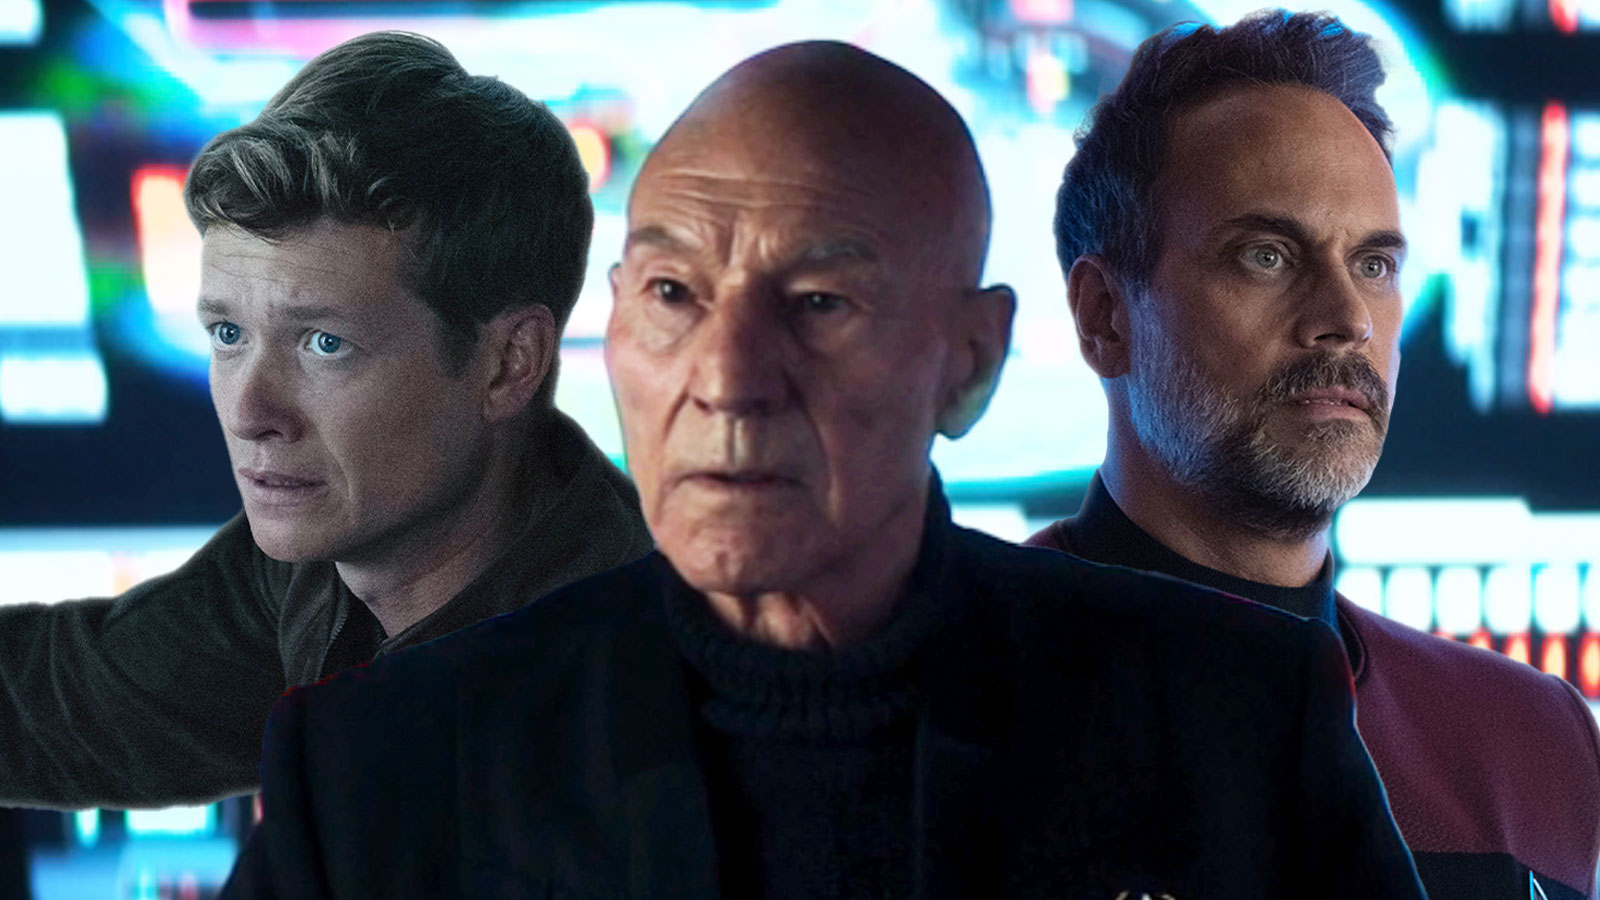 Star Trek: Picard Season 3 Episode 2 “Disengage” Review: The game’s afoot